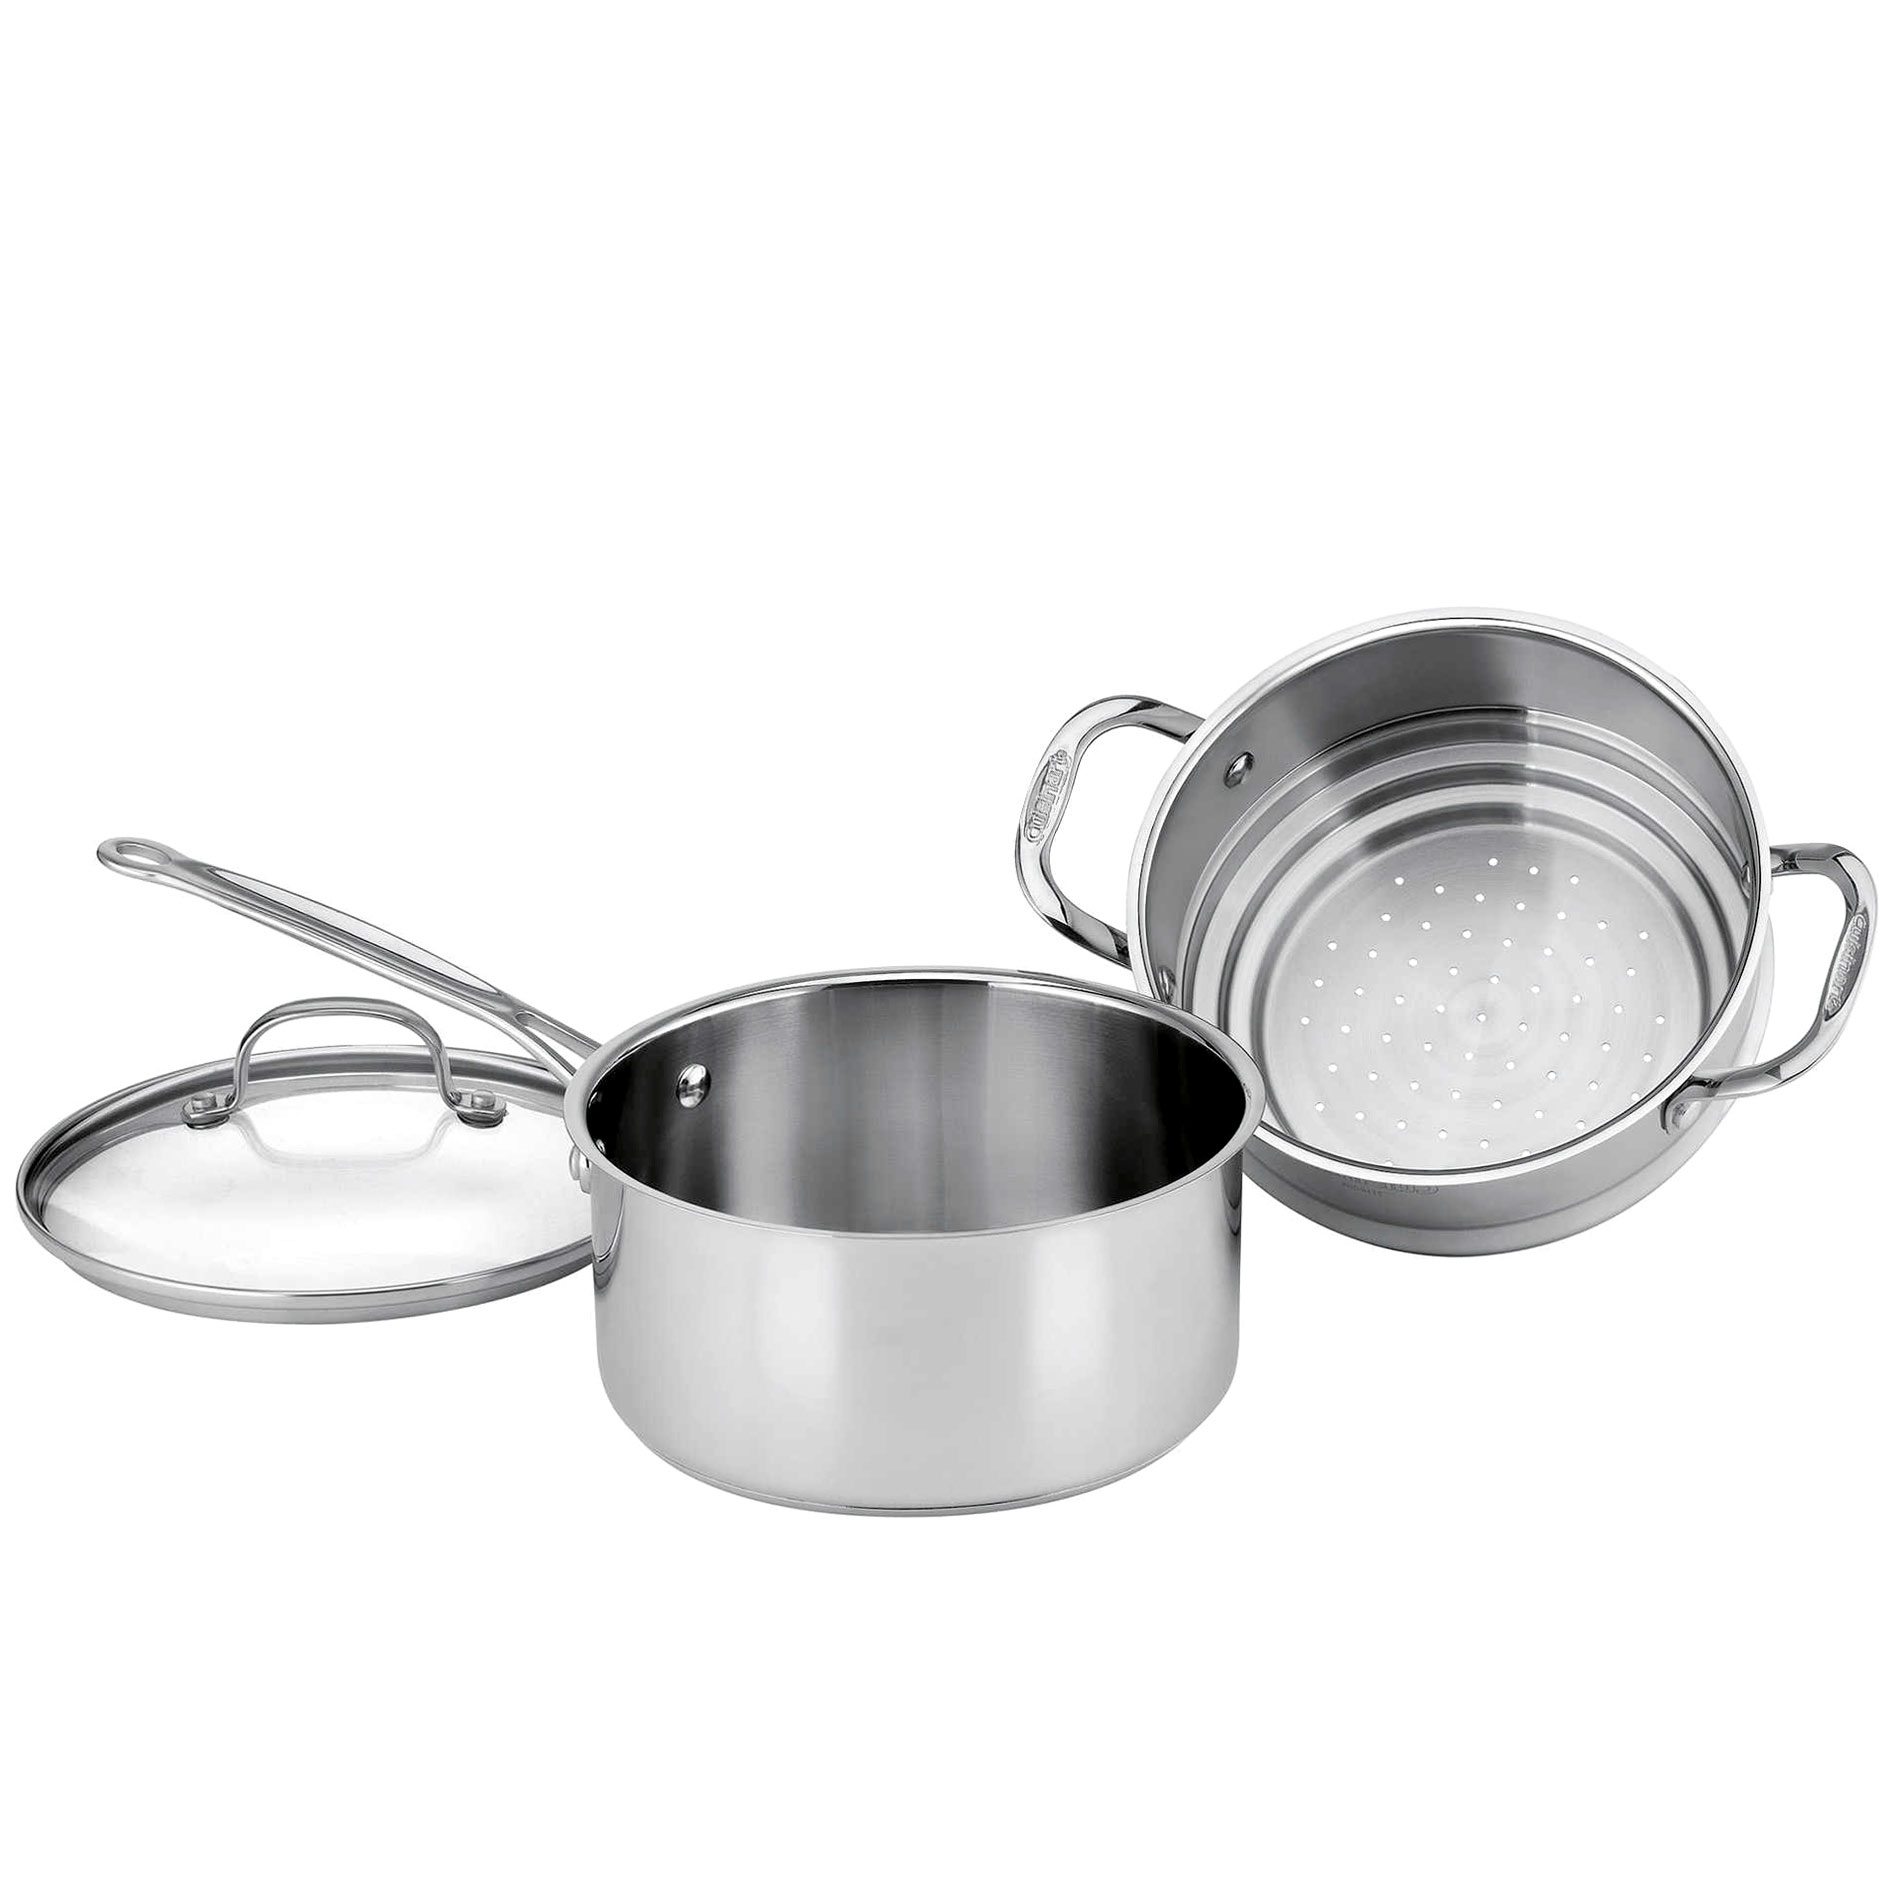 Cuisinart Chef's Classic Stainless Steel 3 qt. Cook and Pour